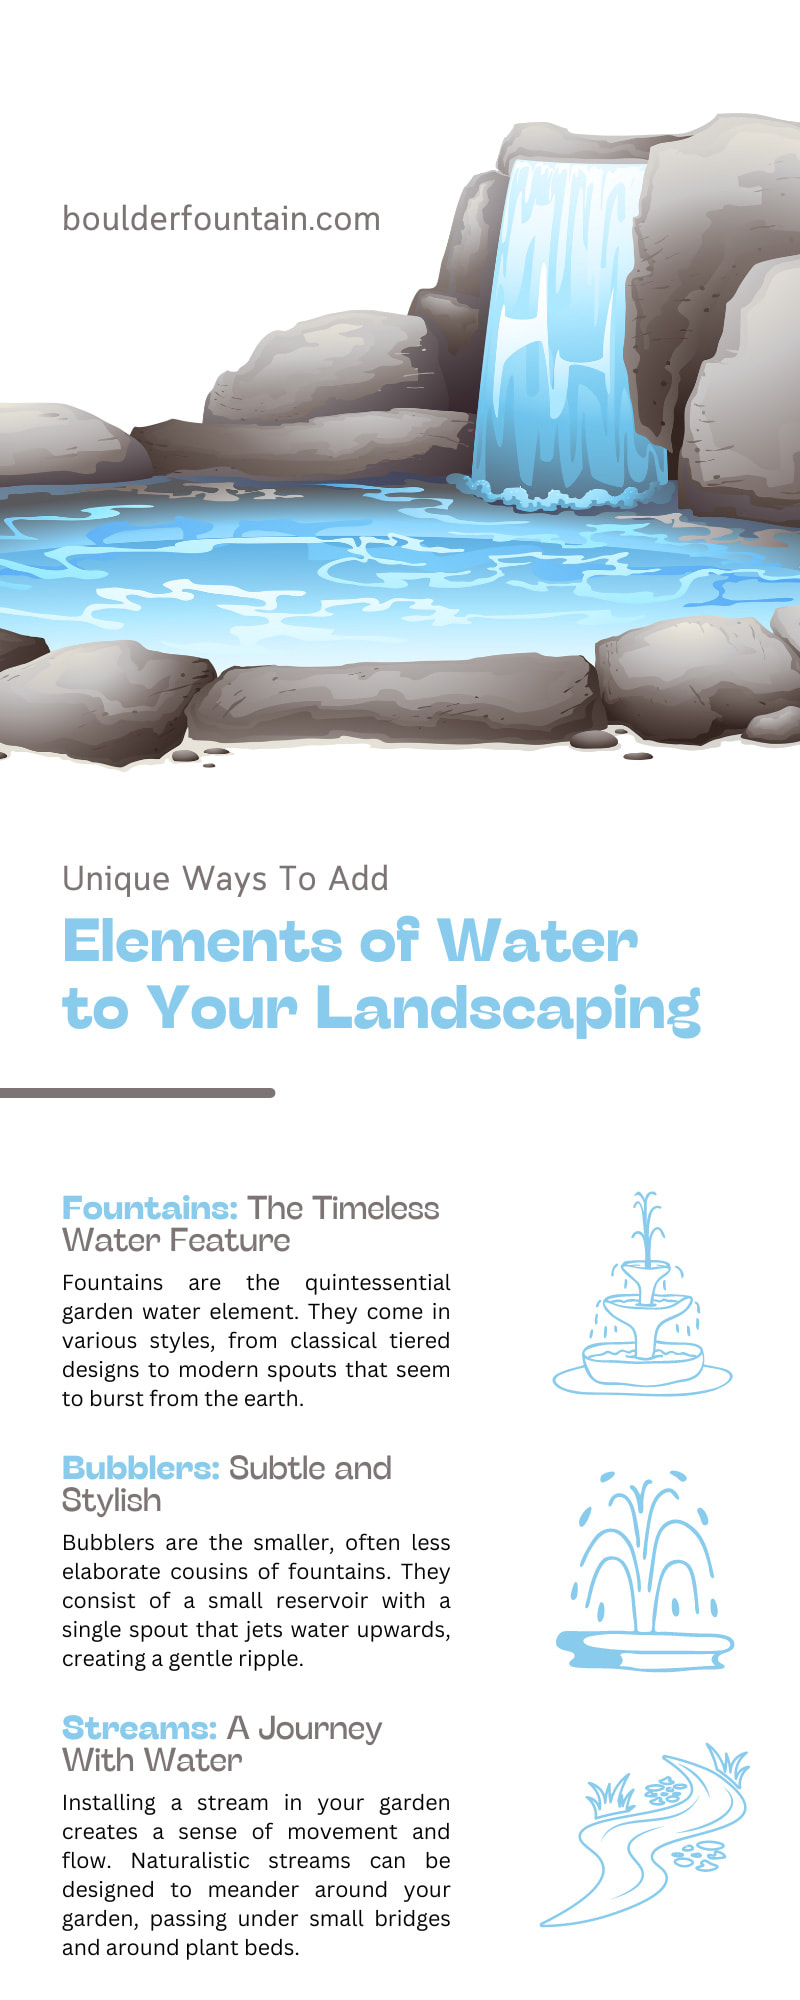 6 Unique Ways To Add Elements of Water to Your Landscaping